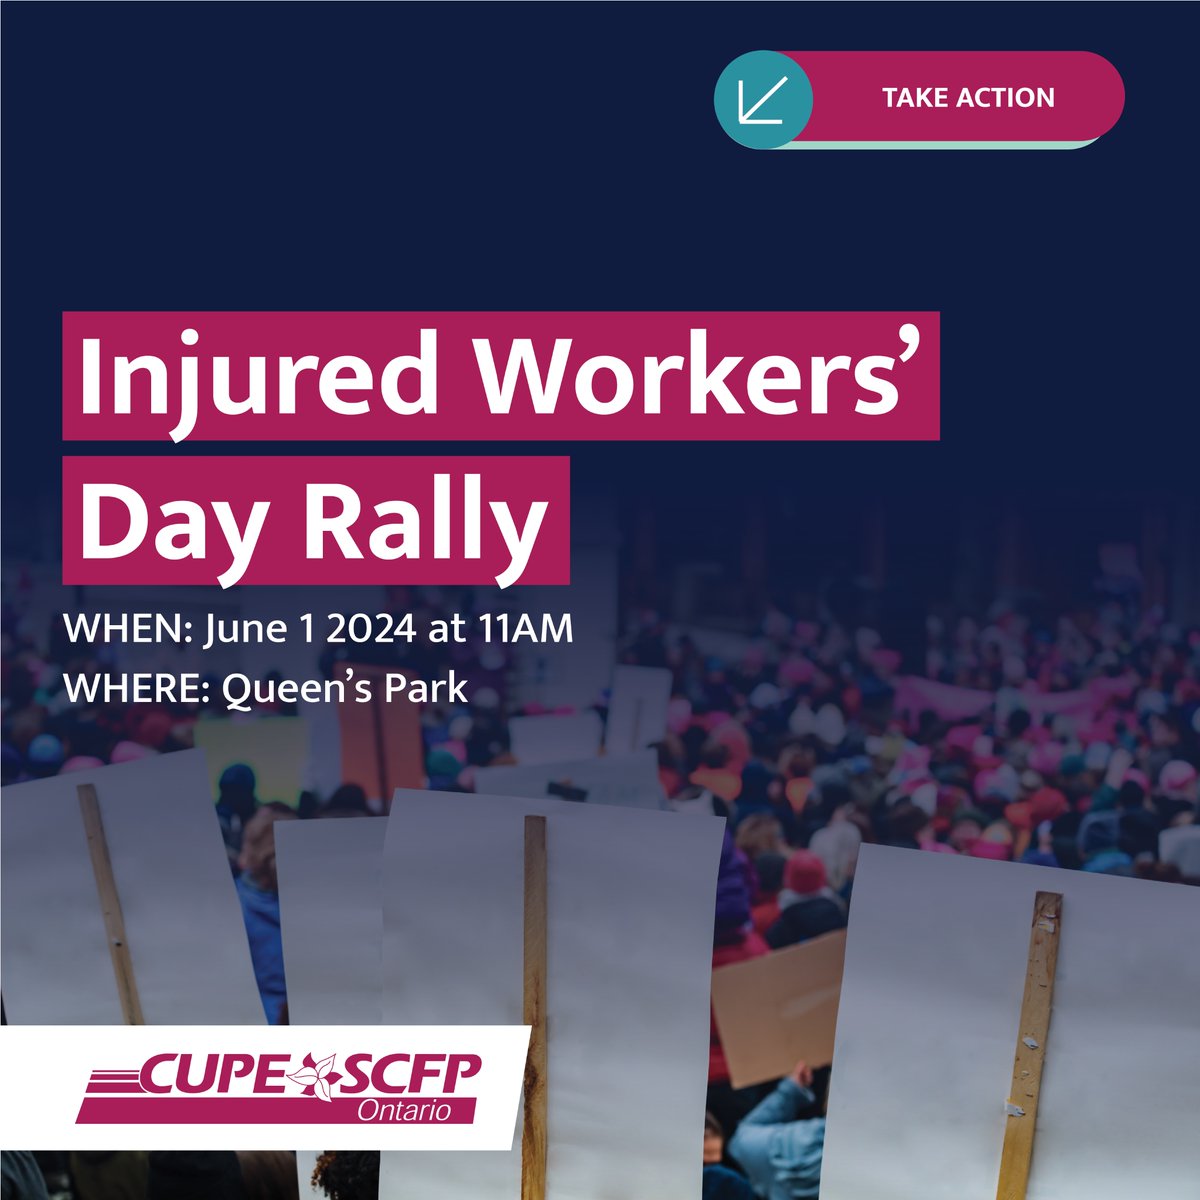 We'll be joining the @OFLabour at a rally on Injured Workers' Day on June 1 in Toronto to demand the Province enshrine basic protections for those who are injured and made ill at work, including important items like: WSIB coverage for all workers; unimpeded access to healthcare;